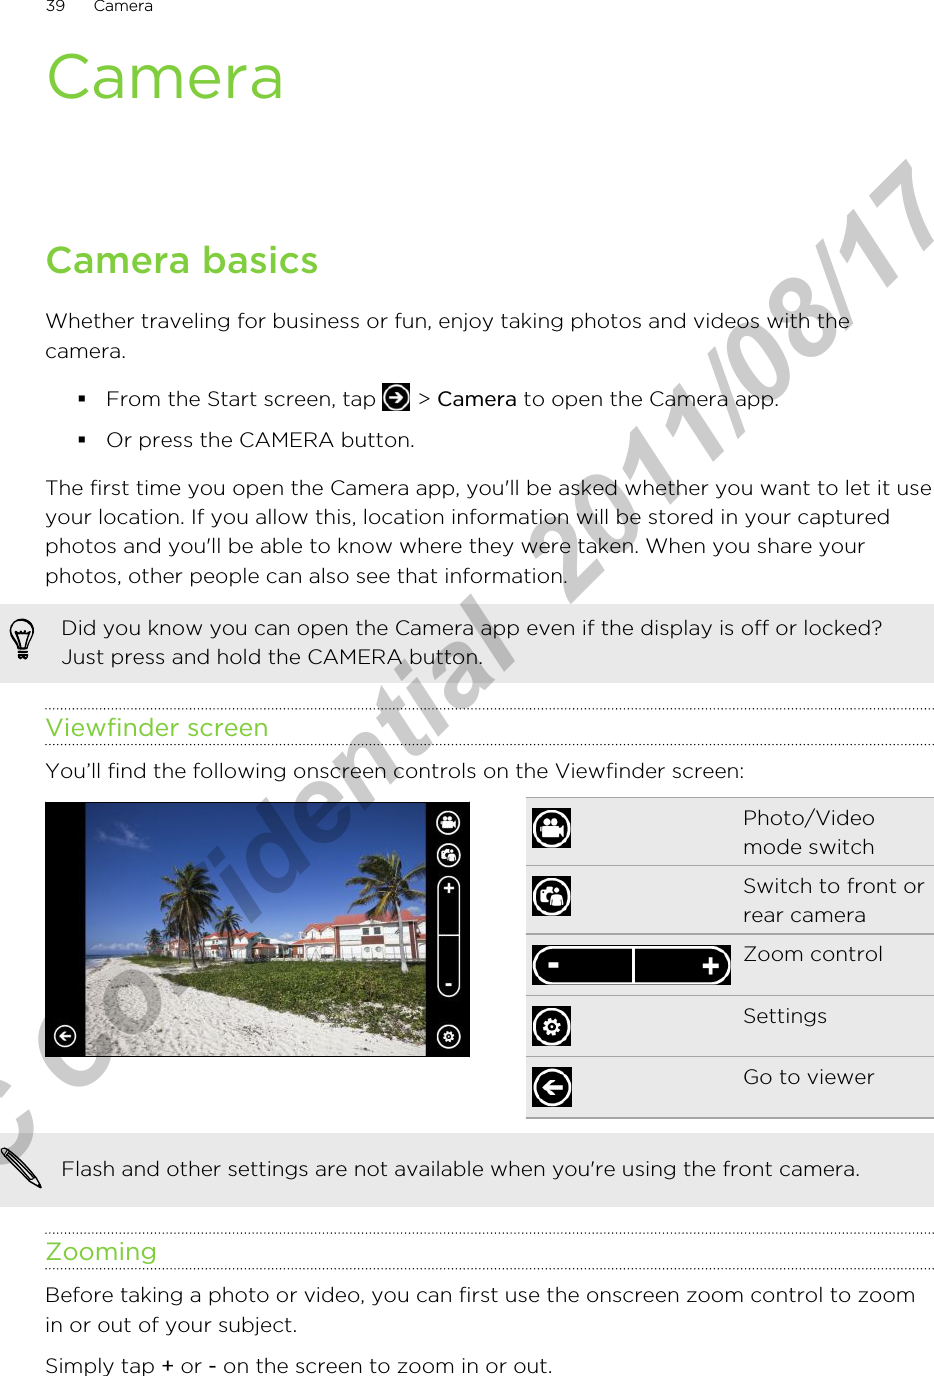 CameraCamera basicsWhether traveling for business or fun, enjoy taking photos and videos with thecamera.§From the Start screen, tap   &gt; Camera to open the Camera app.§Or press the CAMERA button.The first time you open the Camera app, you&apos;ll be asked whether you want to let it useyour location. If you allow this, location information will be stored in your capturedphotos and you&apos;ll be able to know where they were taken. When you share yourphotos, other people can also see that information.Did you know you can open the Camera app even if the display is off or locked?Just press and hold the CAMERA button.Viewfinder screenYou’ll find the following onscreen controls on the Viewfinder screen:Photo/Videomode switchSwitch to front orrear cameraZoom controlSettingsGo to viewerFlash and other settings are not available when you&apos;re using the front camera.ZoomingBefore taking a photo or video, you can first use the onscreen zoom control to zoomin or out of your subject.Simply tap + or - on the screen to zoom in or out.39 CameraHTC Confidential  2011/08/17 